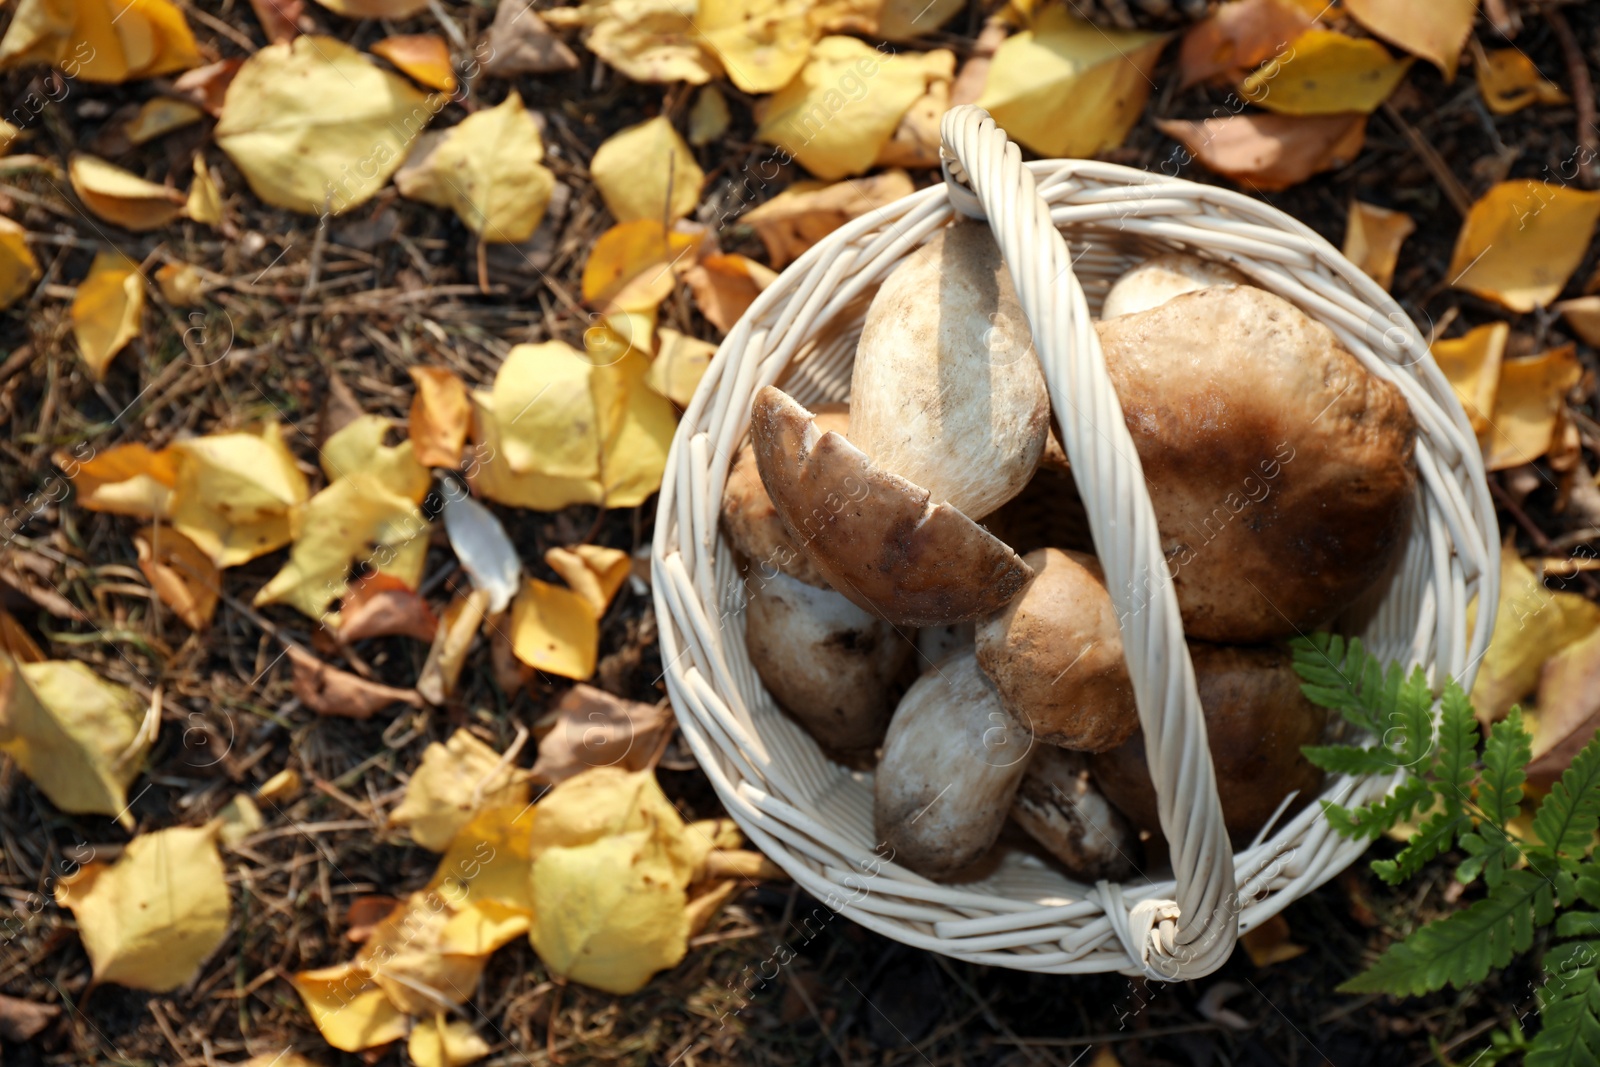 Photo of Wicker basket with fresh wild mushrooms in forest, top view